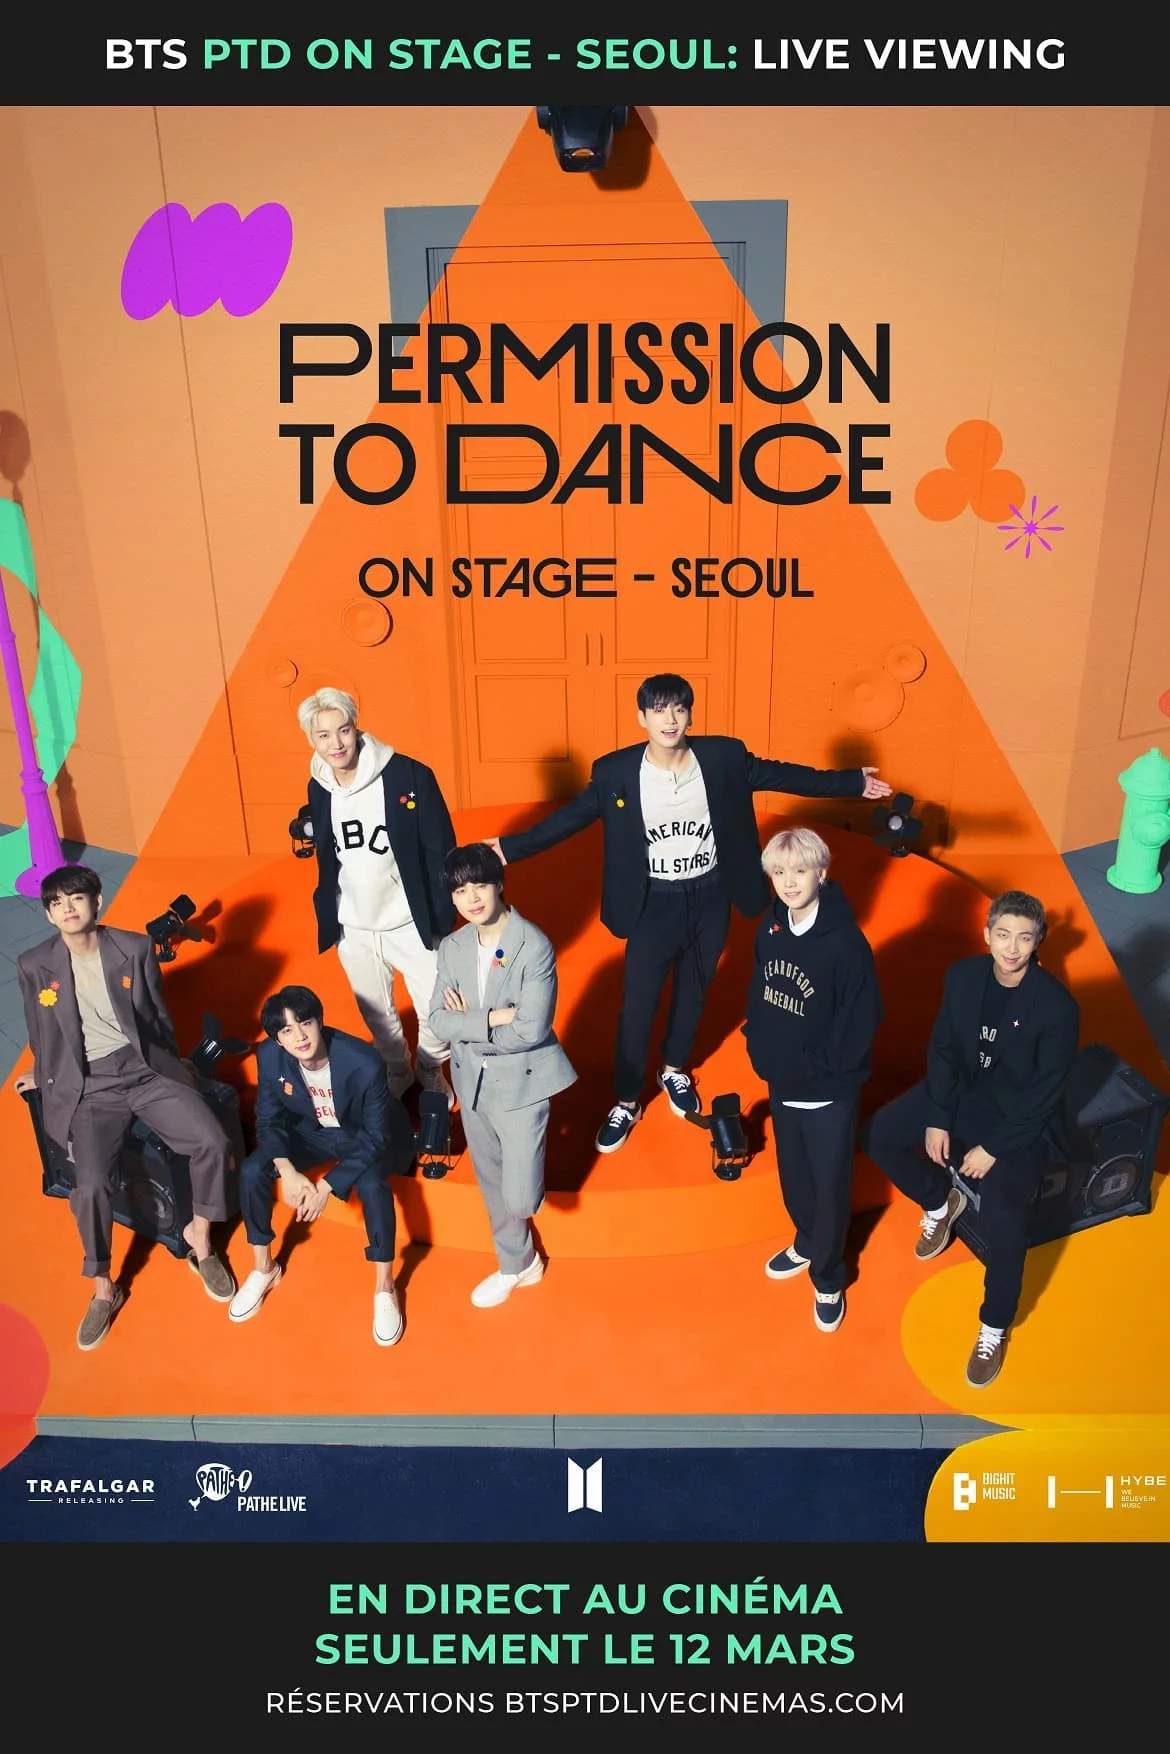 Photo 1 du film : BTS Permission to dance on stage - Seoul : Live viewing